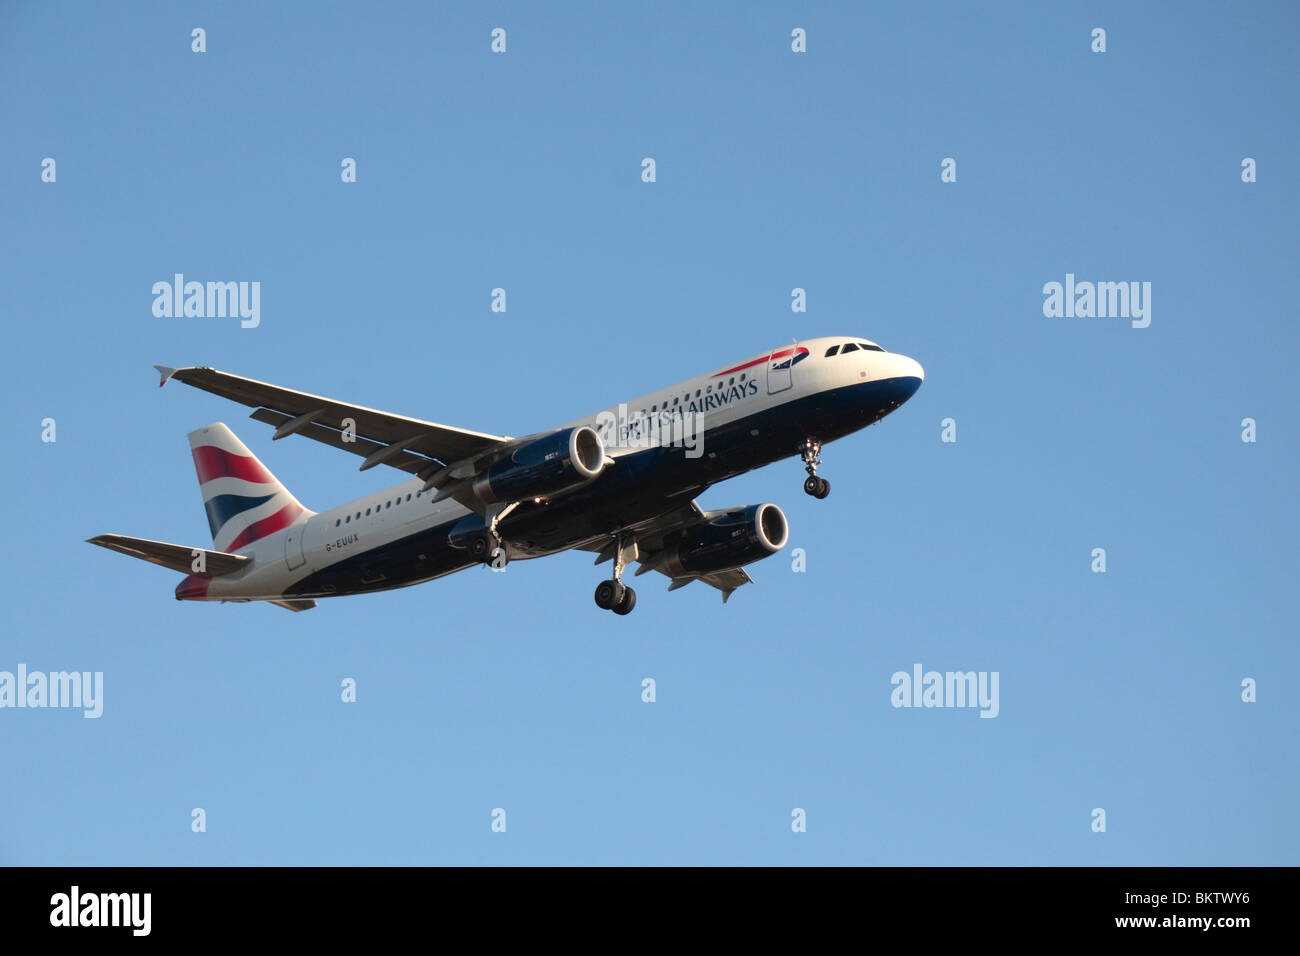 A British Airways Airbus A320-232 coming in to land at London Heathrow, UK.  August 2009. (G-EUUX) Stock Photo